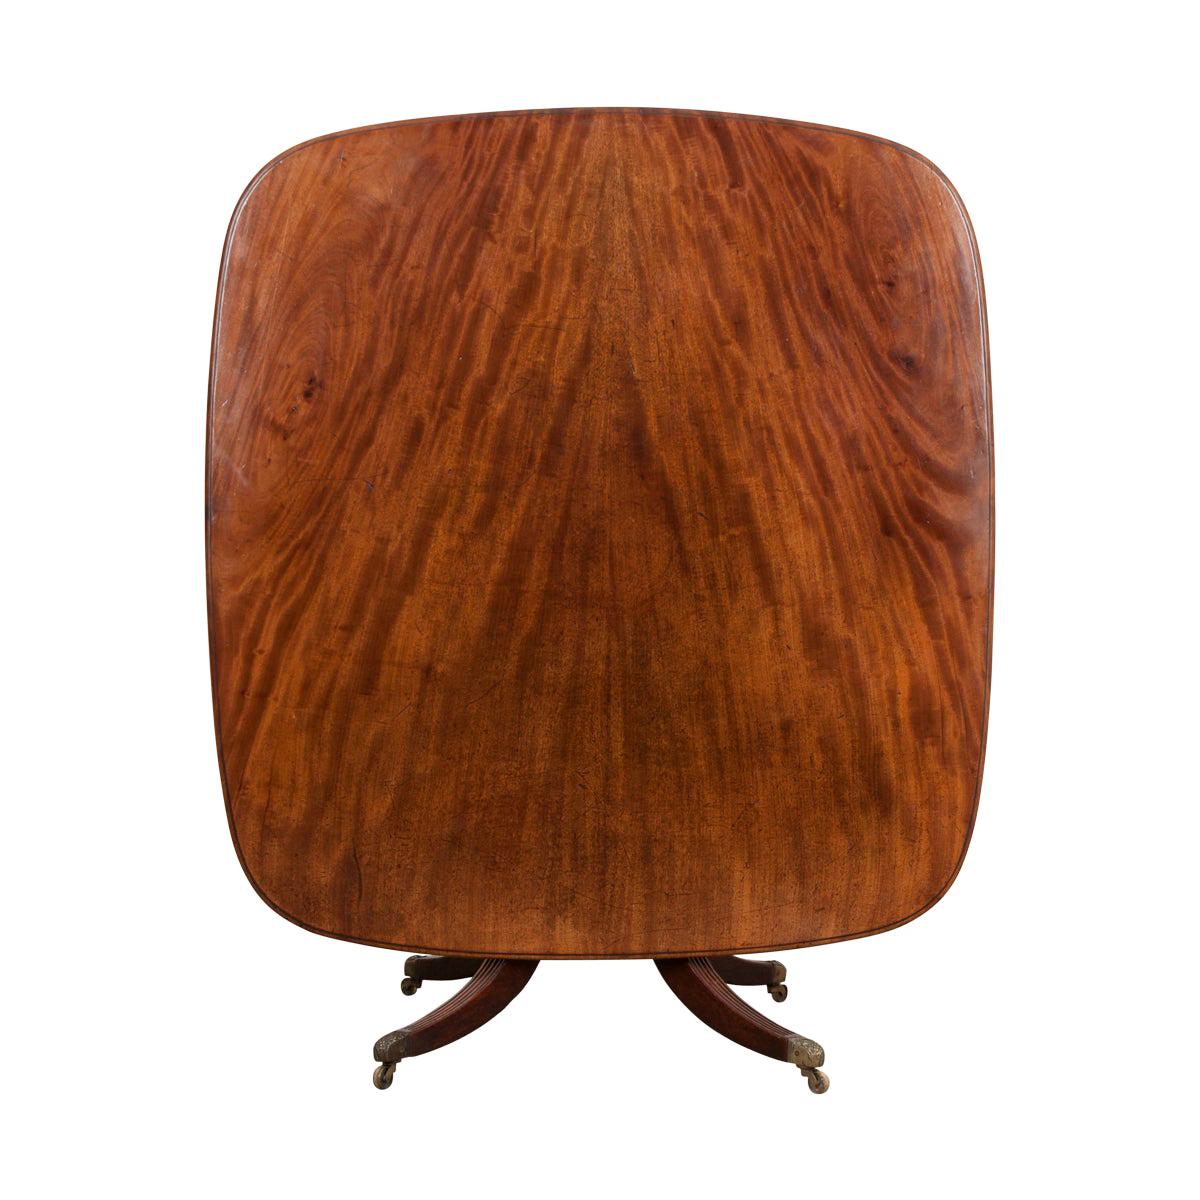 English 19th Century Mahogany Tilt-Top Center Table For Sale